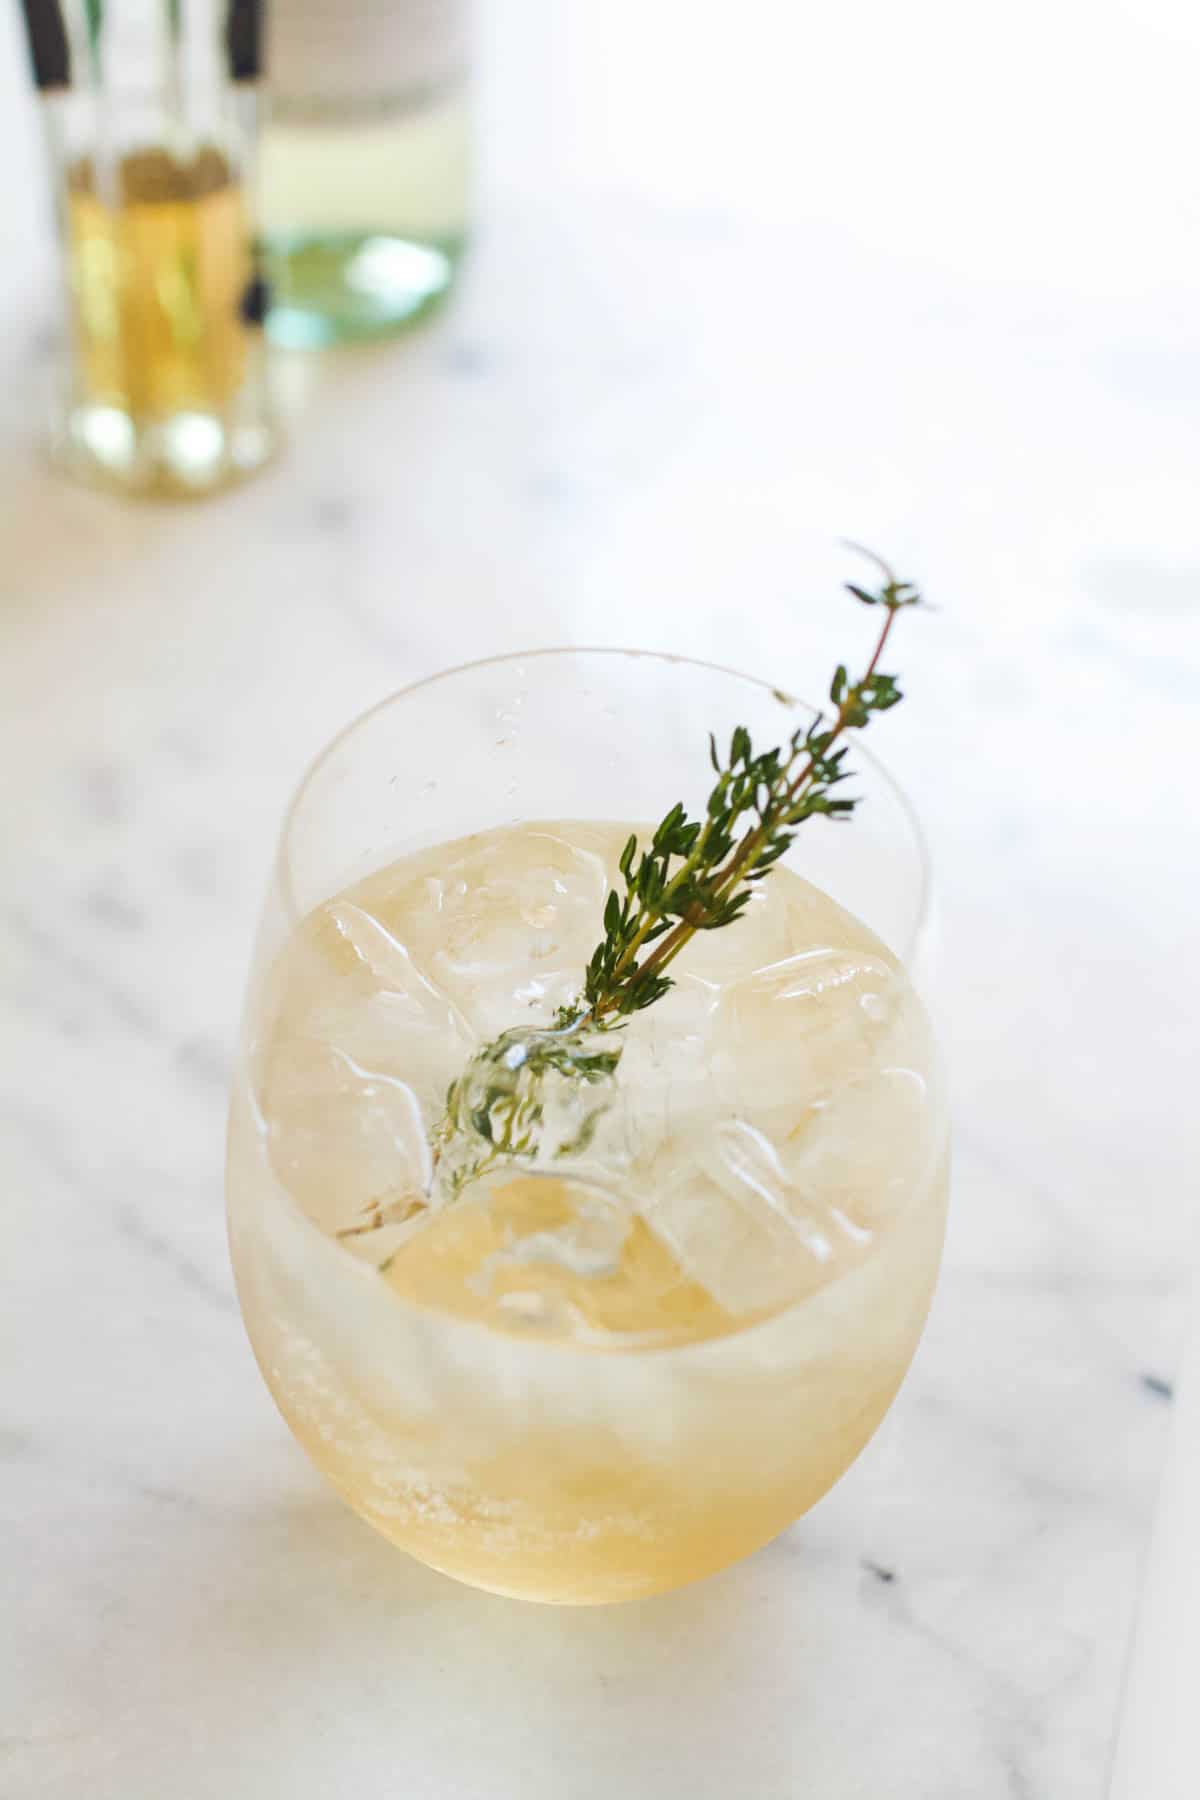 A St. Germain Spritzer in a glass garnished with a sprig of rosemary on a white marble countertop.